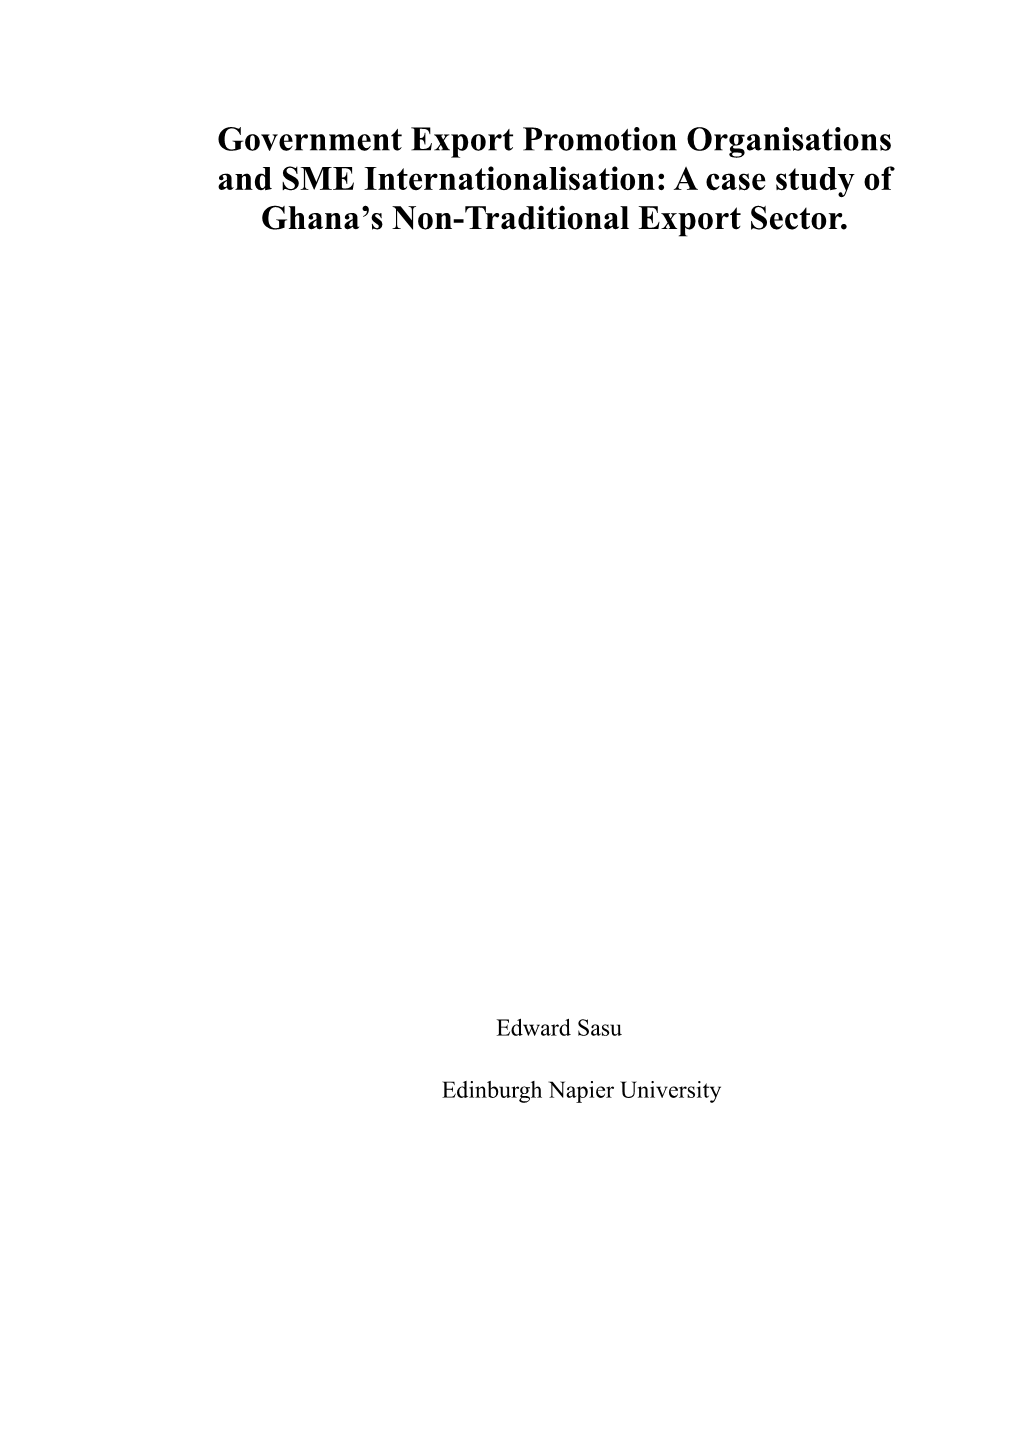 Government Export Promotion Organisations and SME Internationalisation: a Case Study of Ghana’S Non-Traditional Export Sector